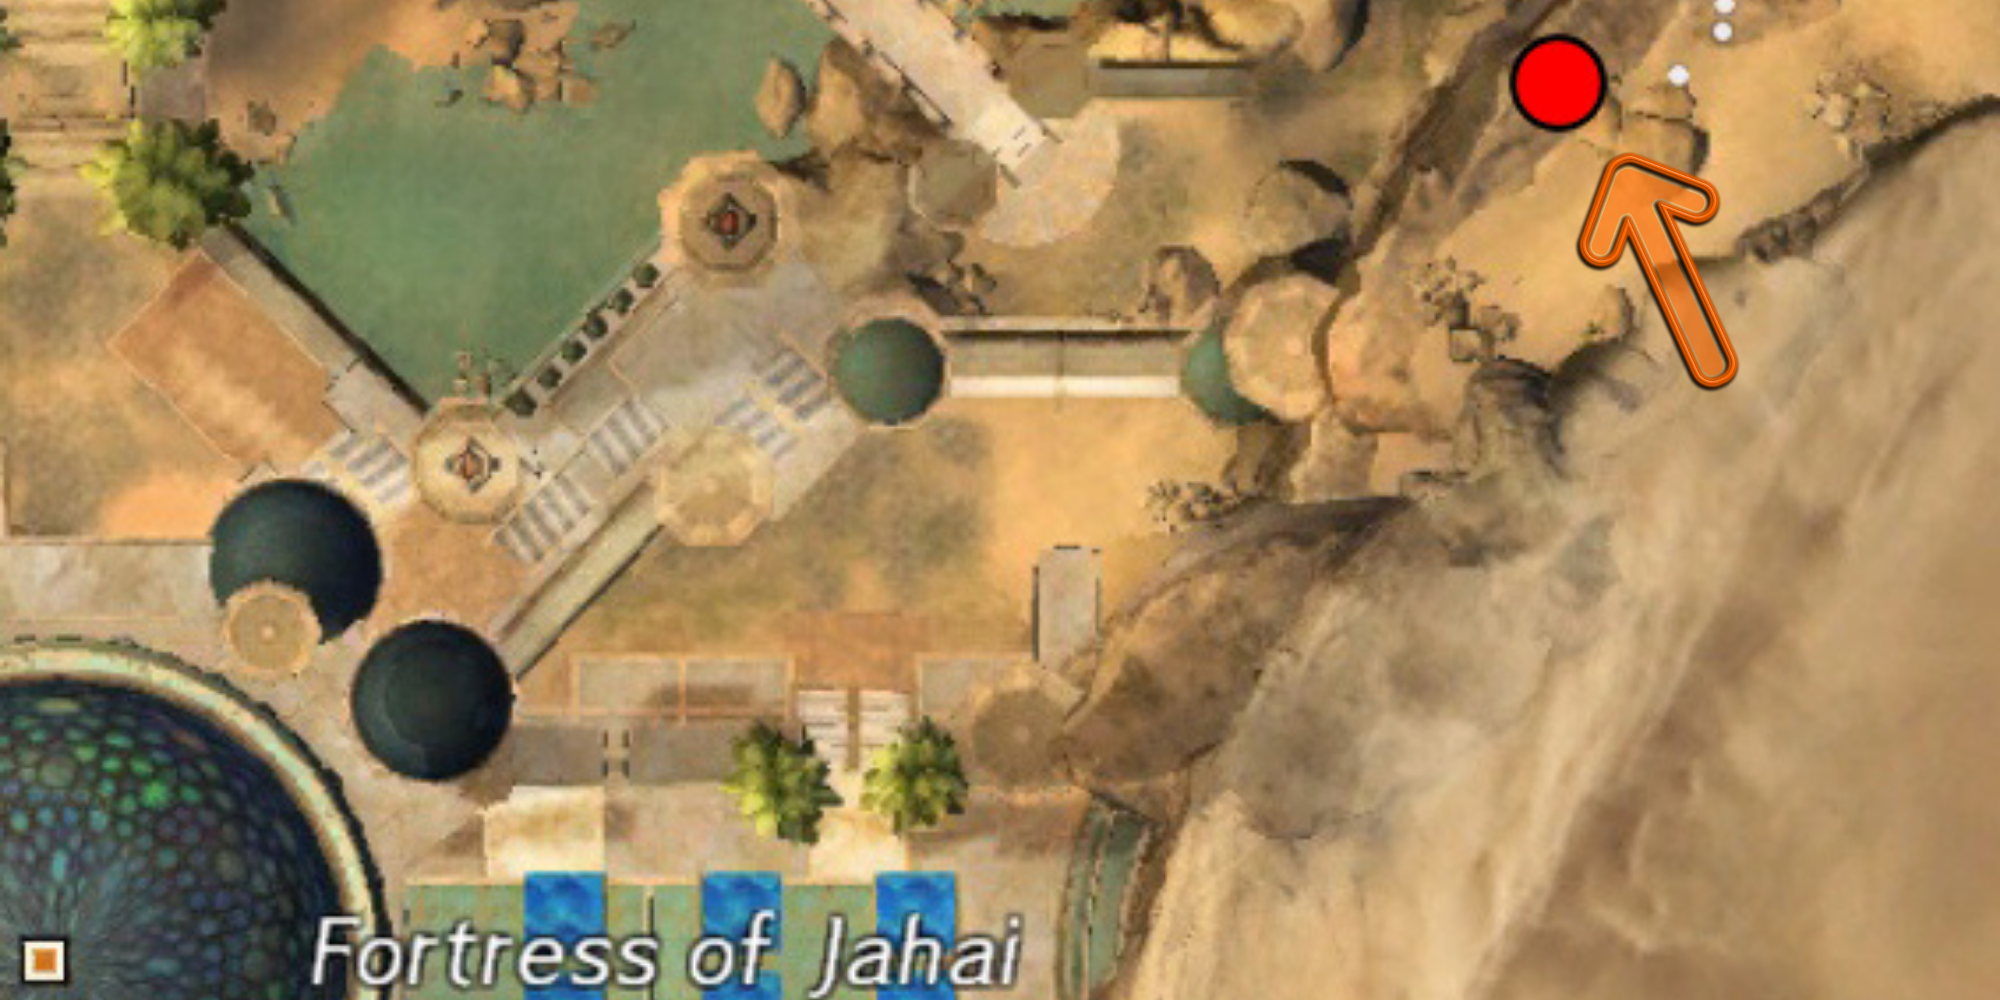 guild-wars-2-gorriks-location-in-fortress-of-jahai-8783123